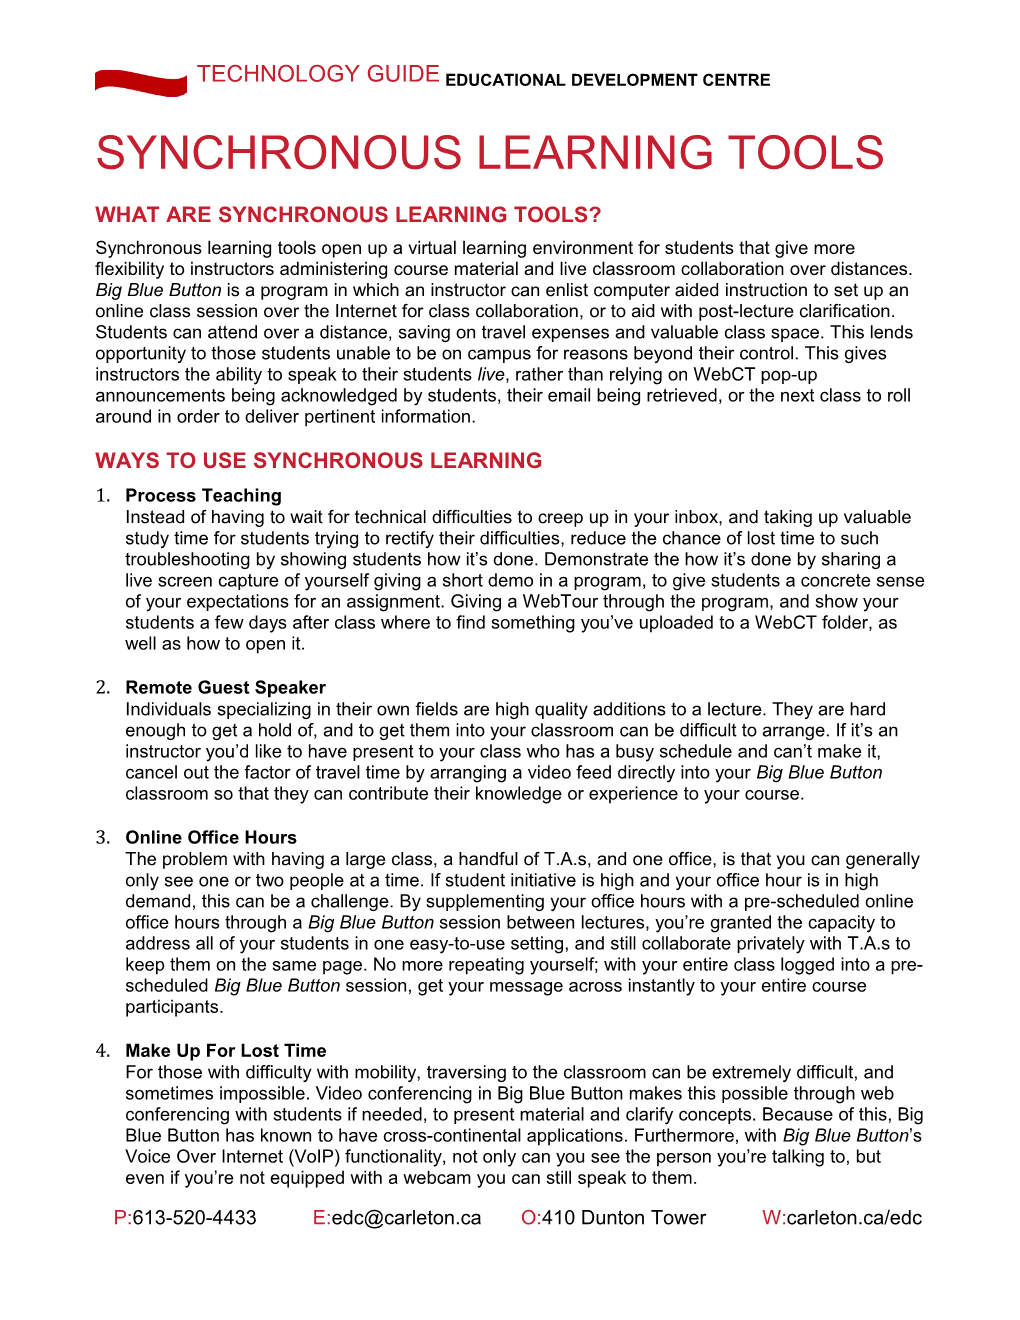 What Are Synchronous Learning Tools?